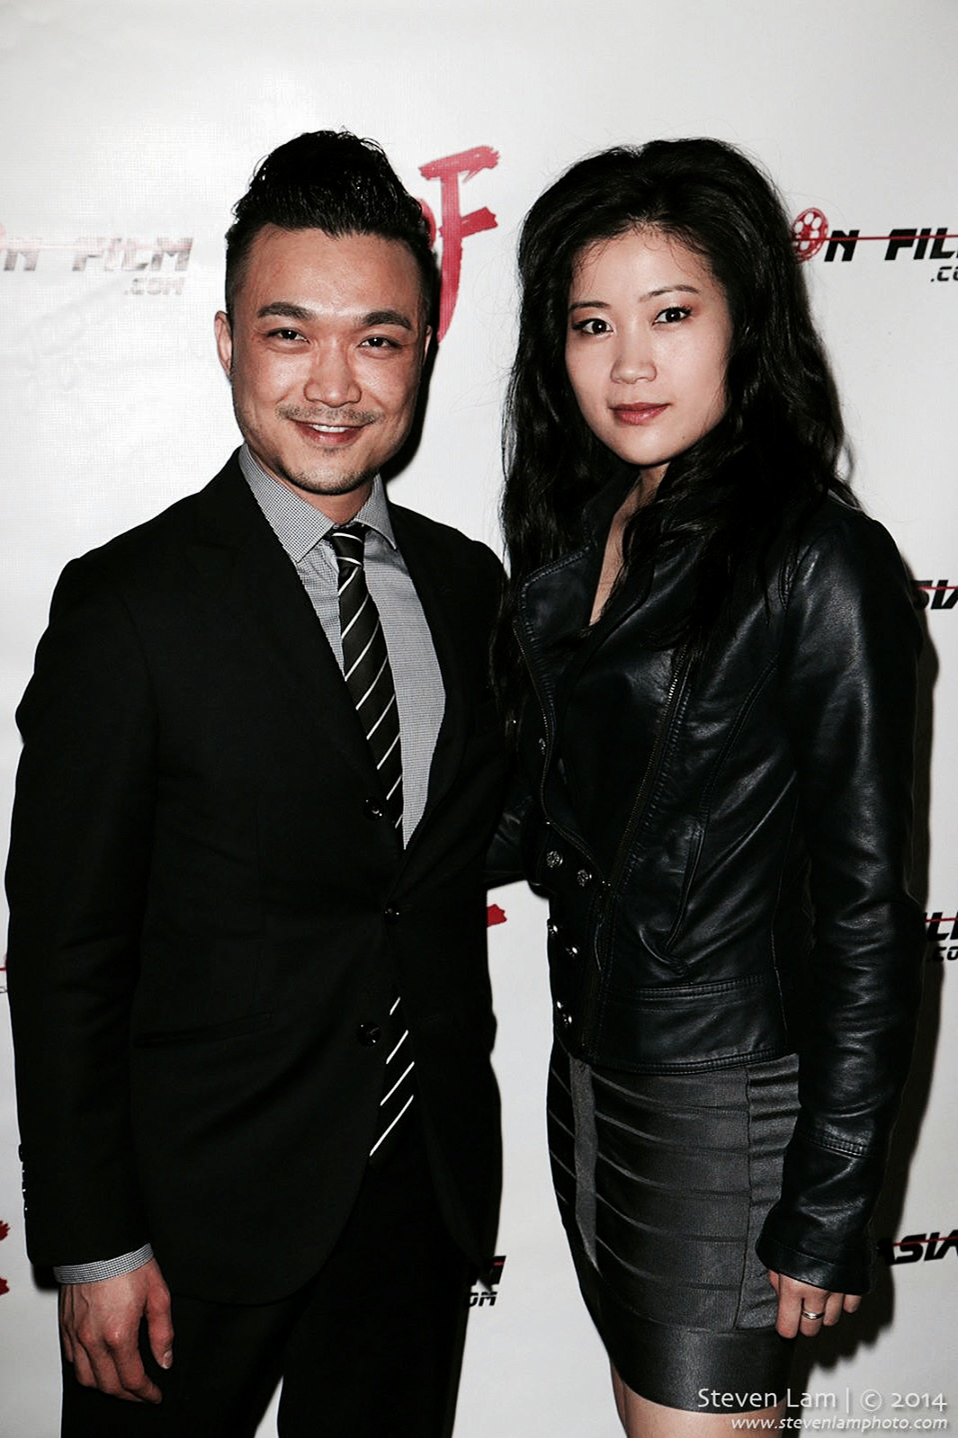 Norman Yeung and Jadyn Wong at HollyShorts/Asians On Film screening, TCL Chinese Theatre, Hollywood, 2014.